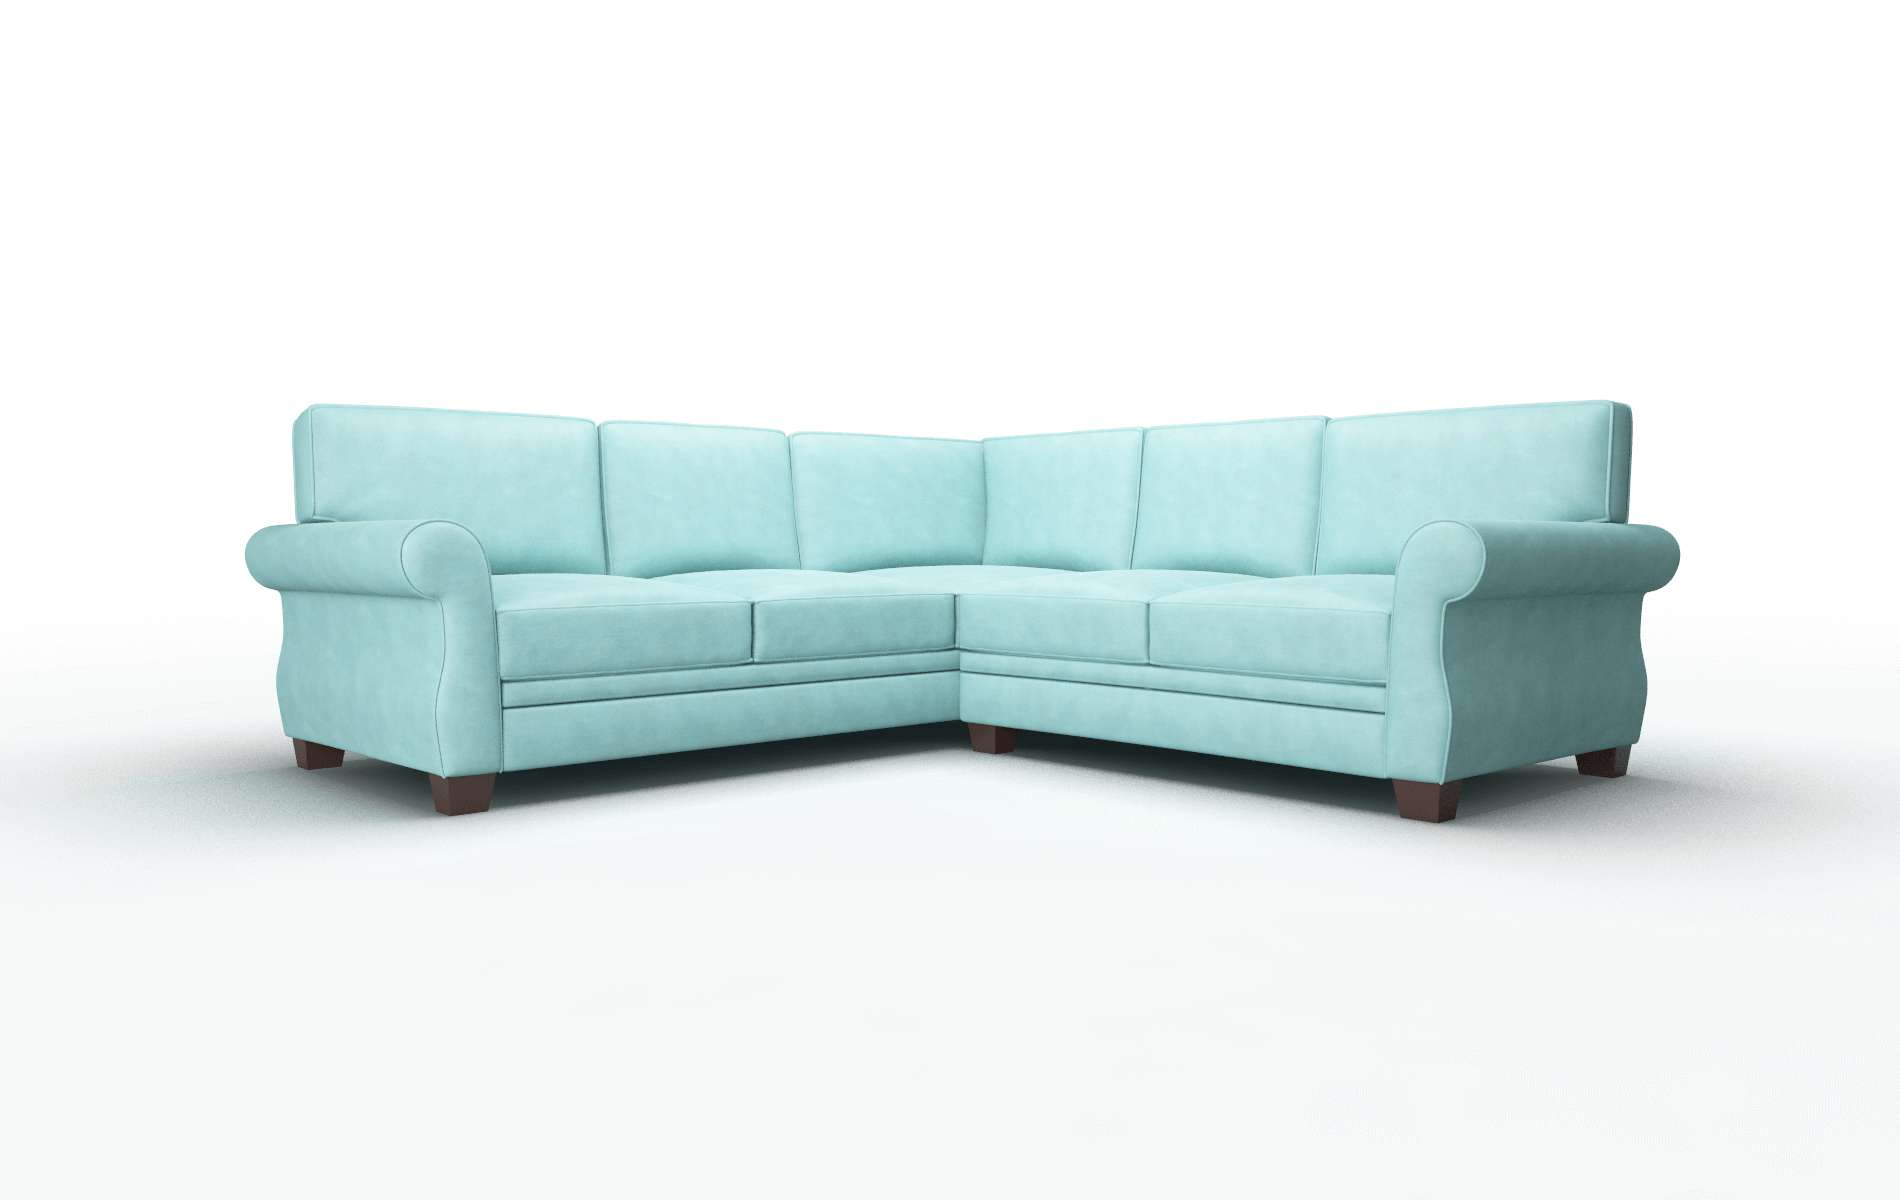 Rome Curious Turquoise Sectional espresso legs 1